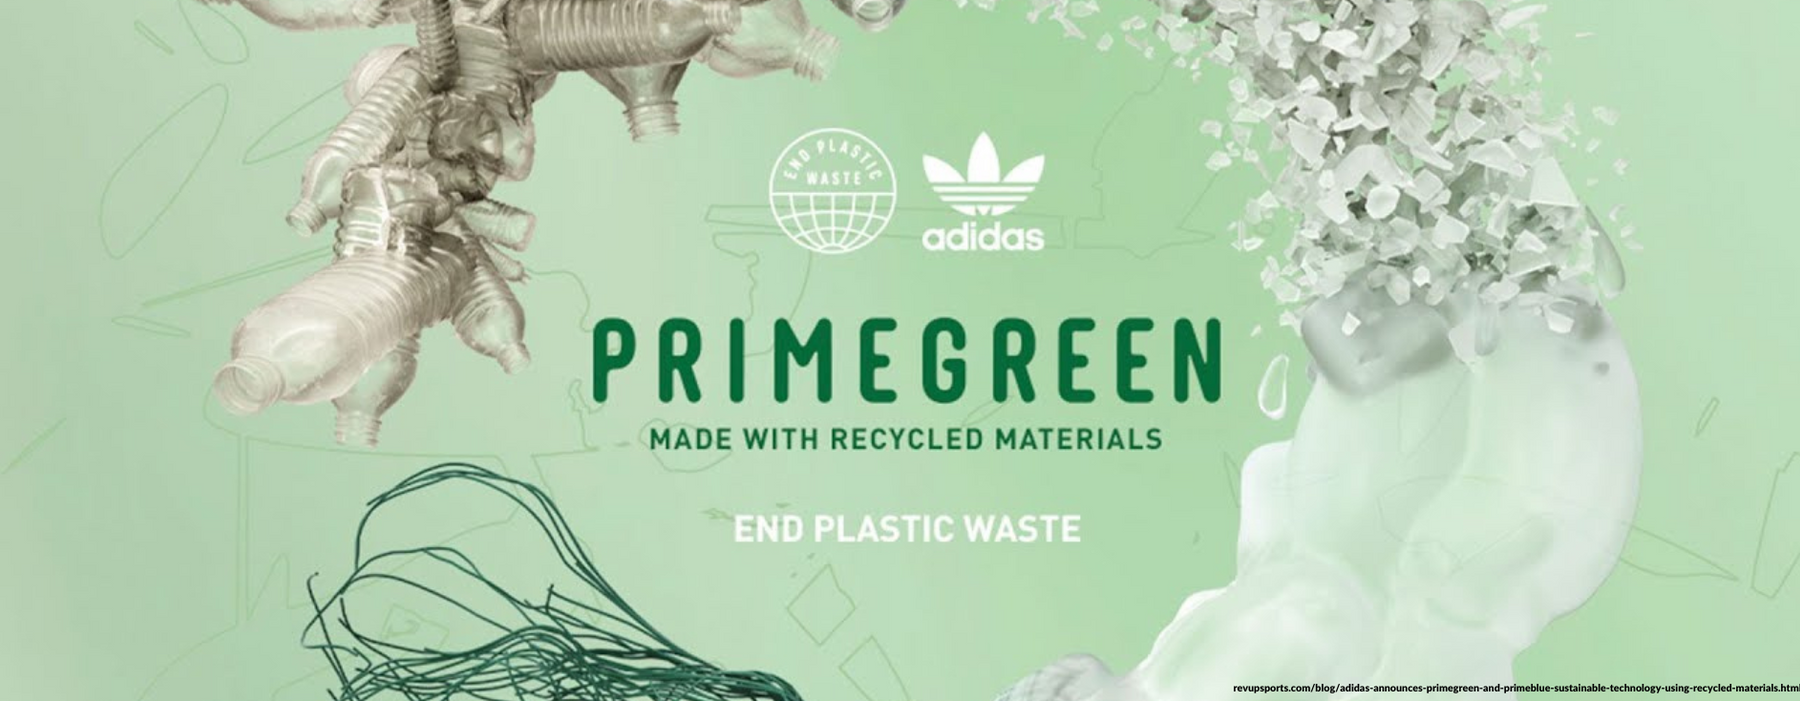 Adidas - Live Your Passion For Sport And Make The Planet More Sustainable